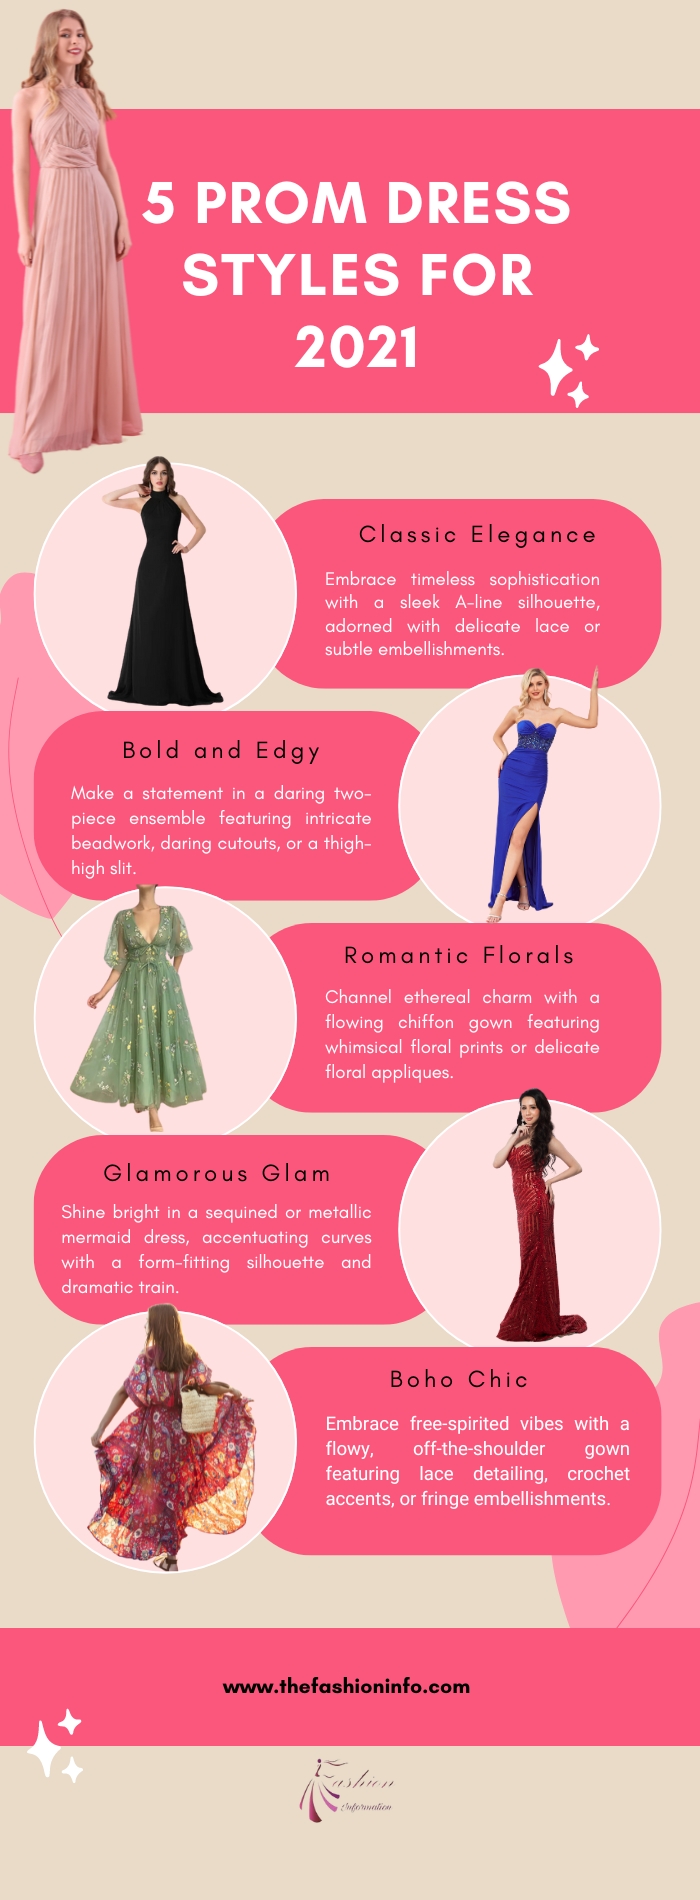 5 Prom Dress Styles For 2021